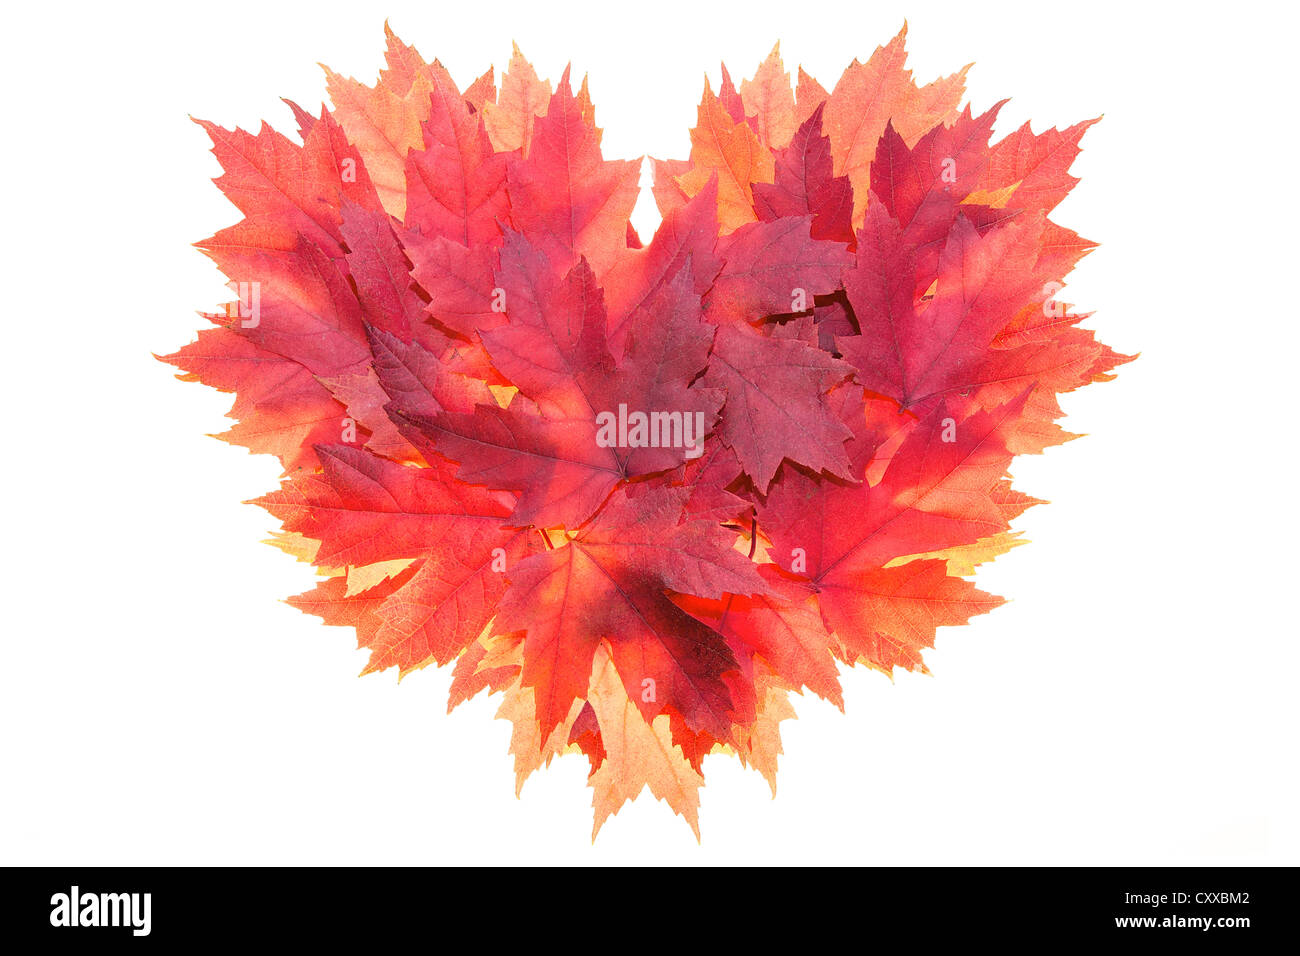 Fall Season Red Maple Tree Leaves Forming Heart Shape Isolated on White Background Stock Photo